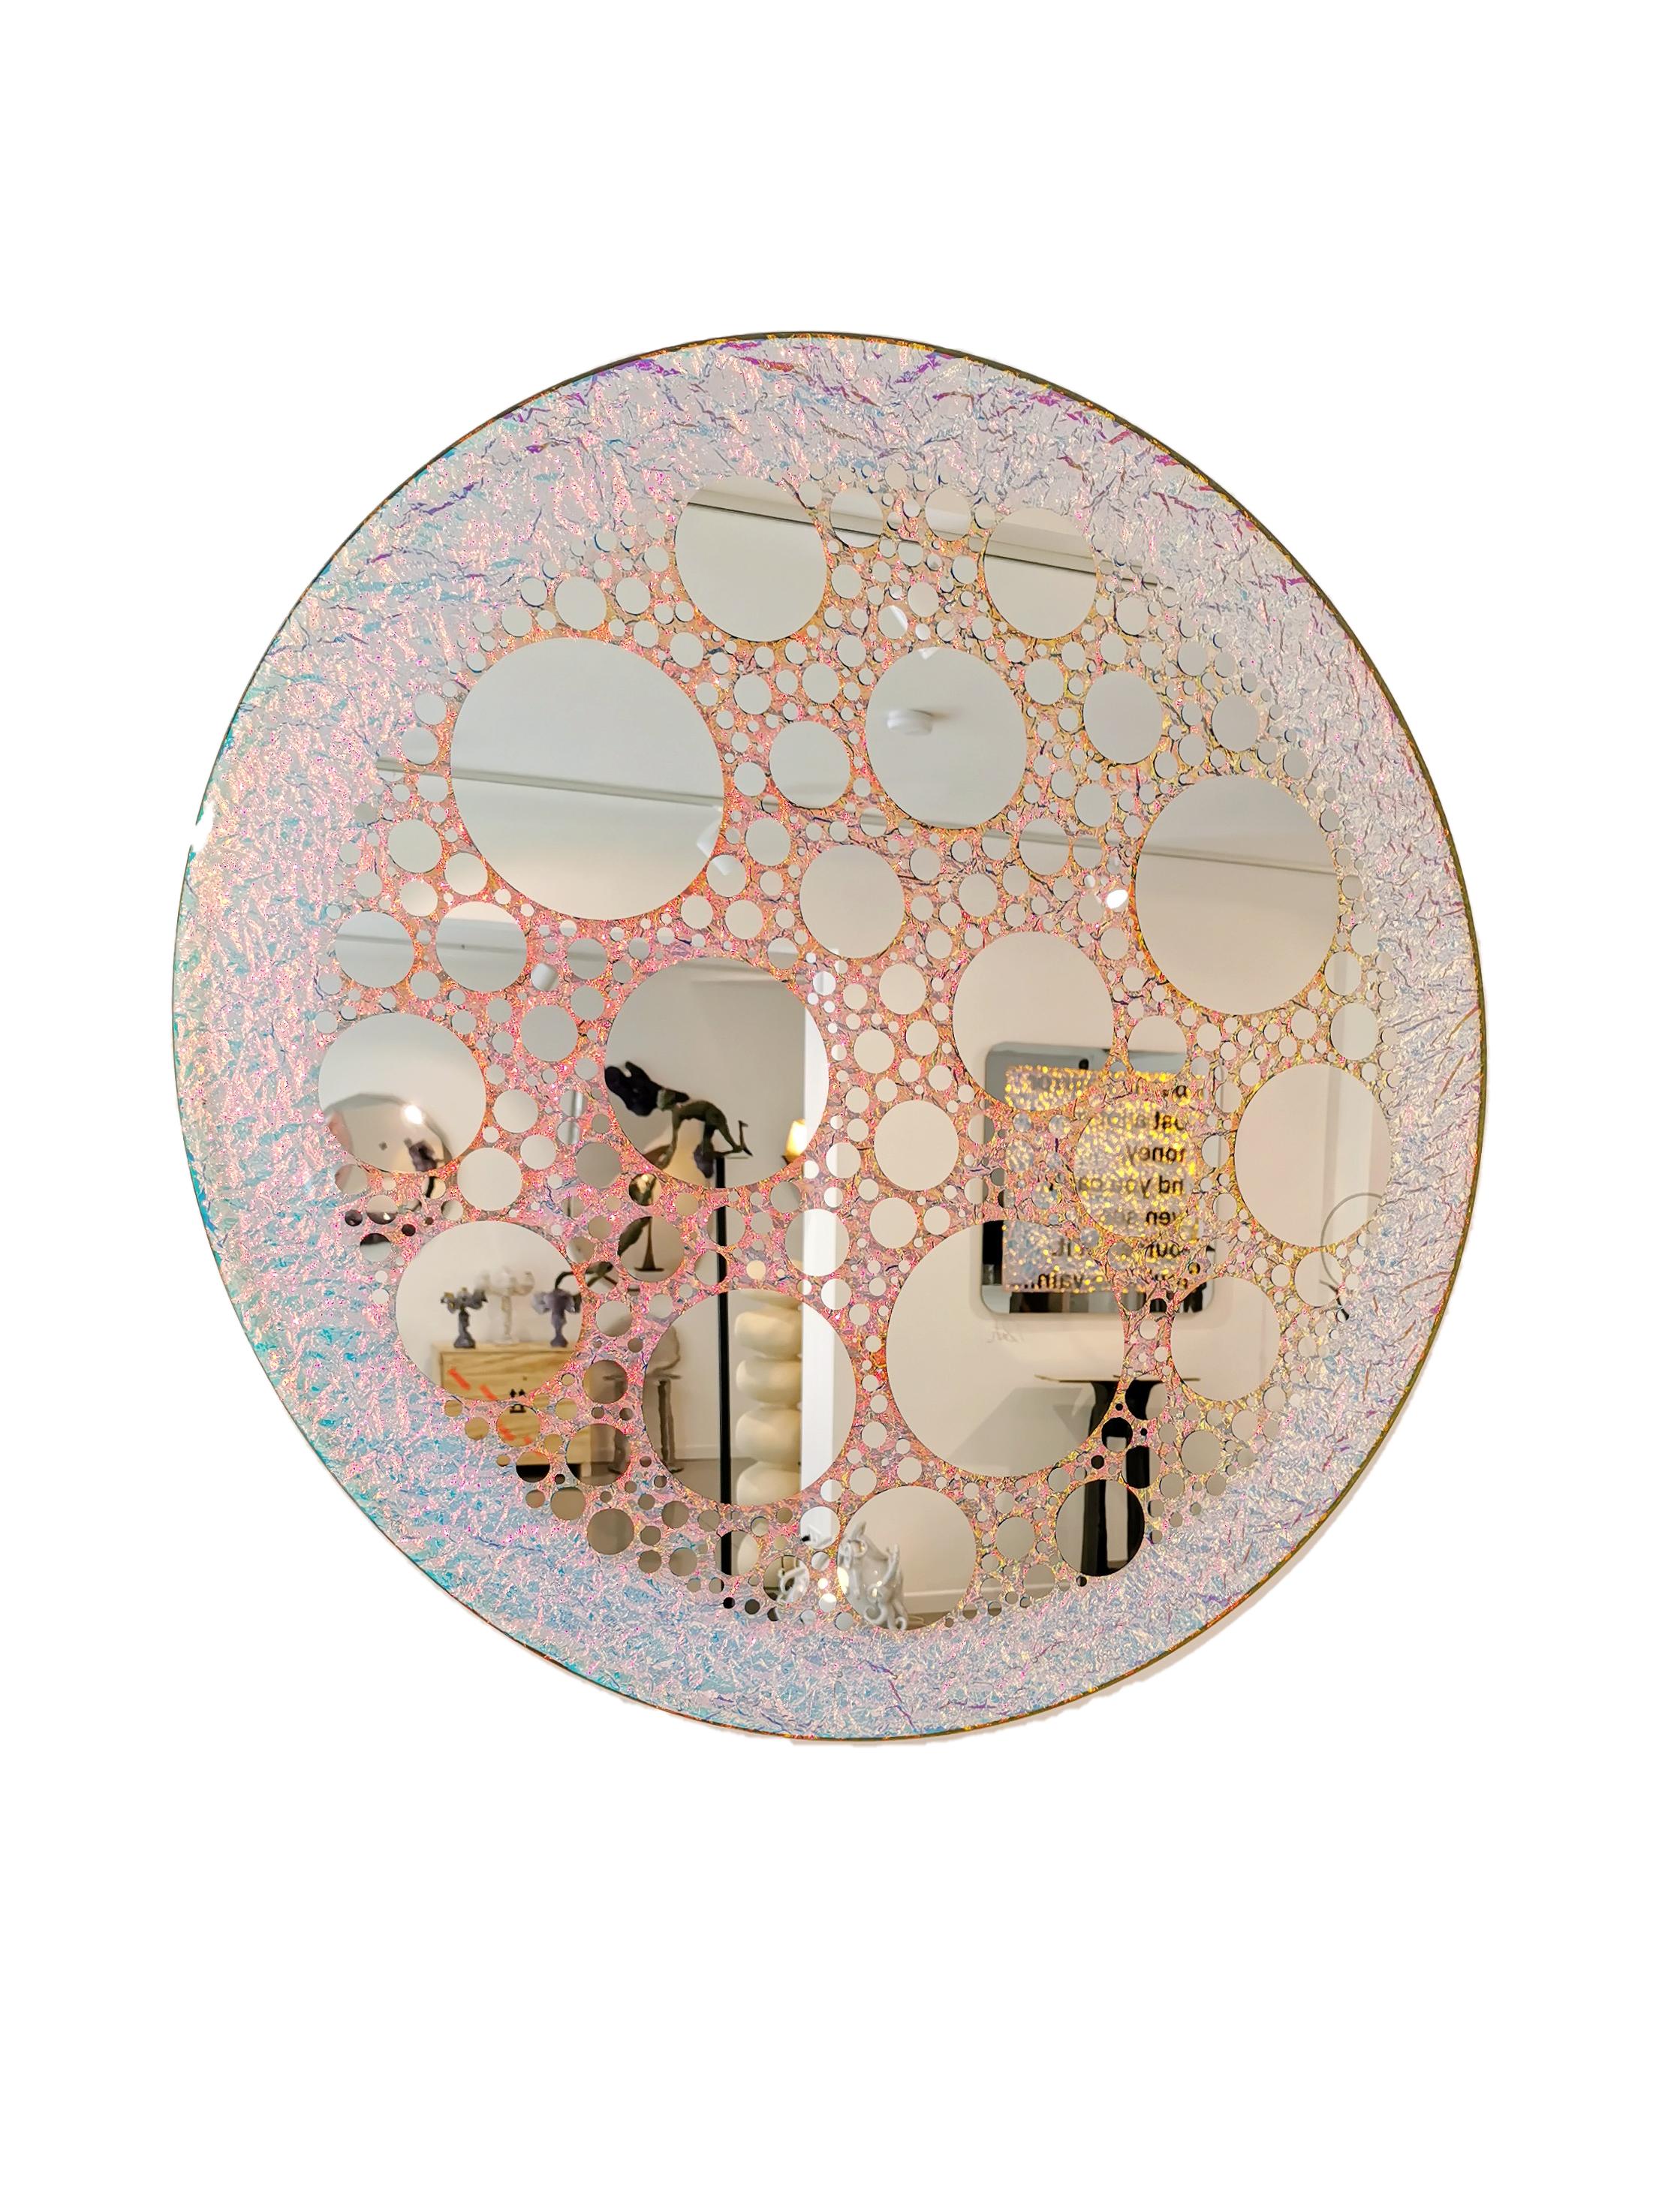 Contemporary 21st Century Limited Edition Crazy Circles Mirror by Troy Smith For Sale